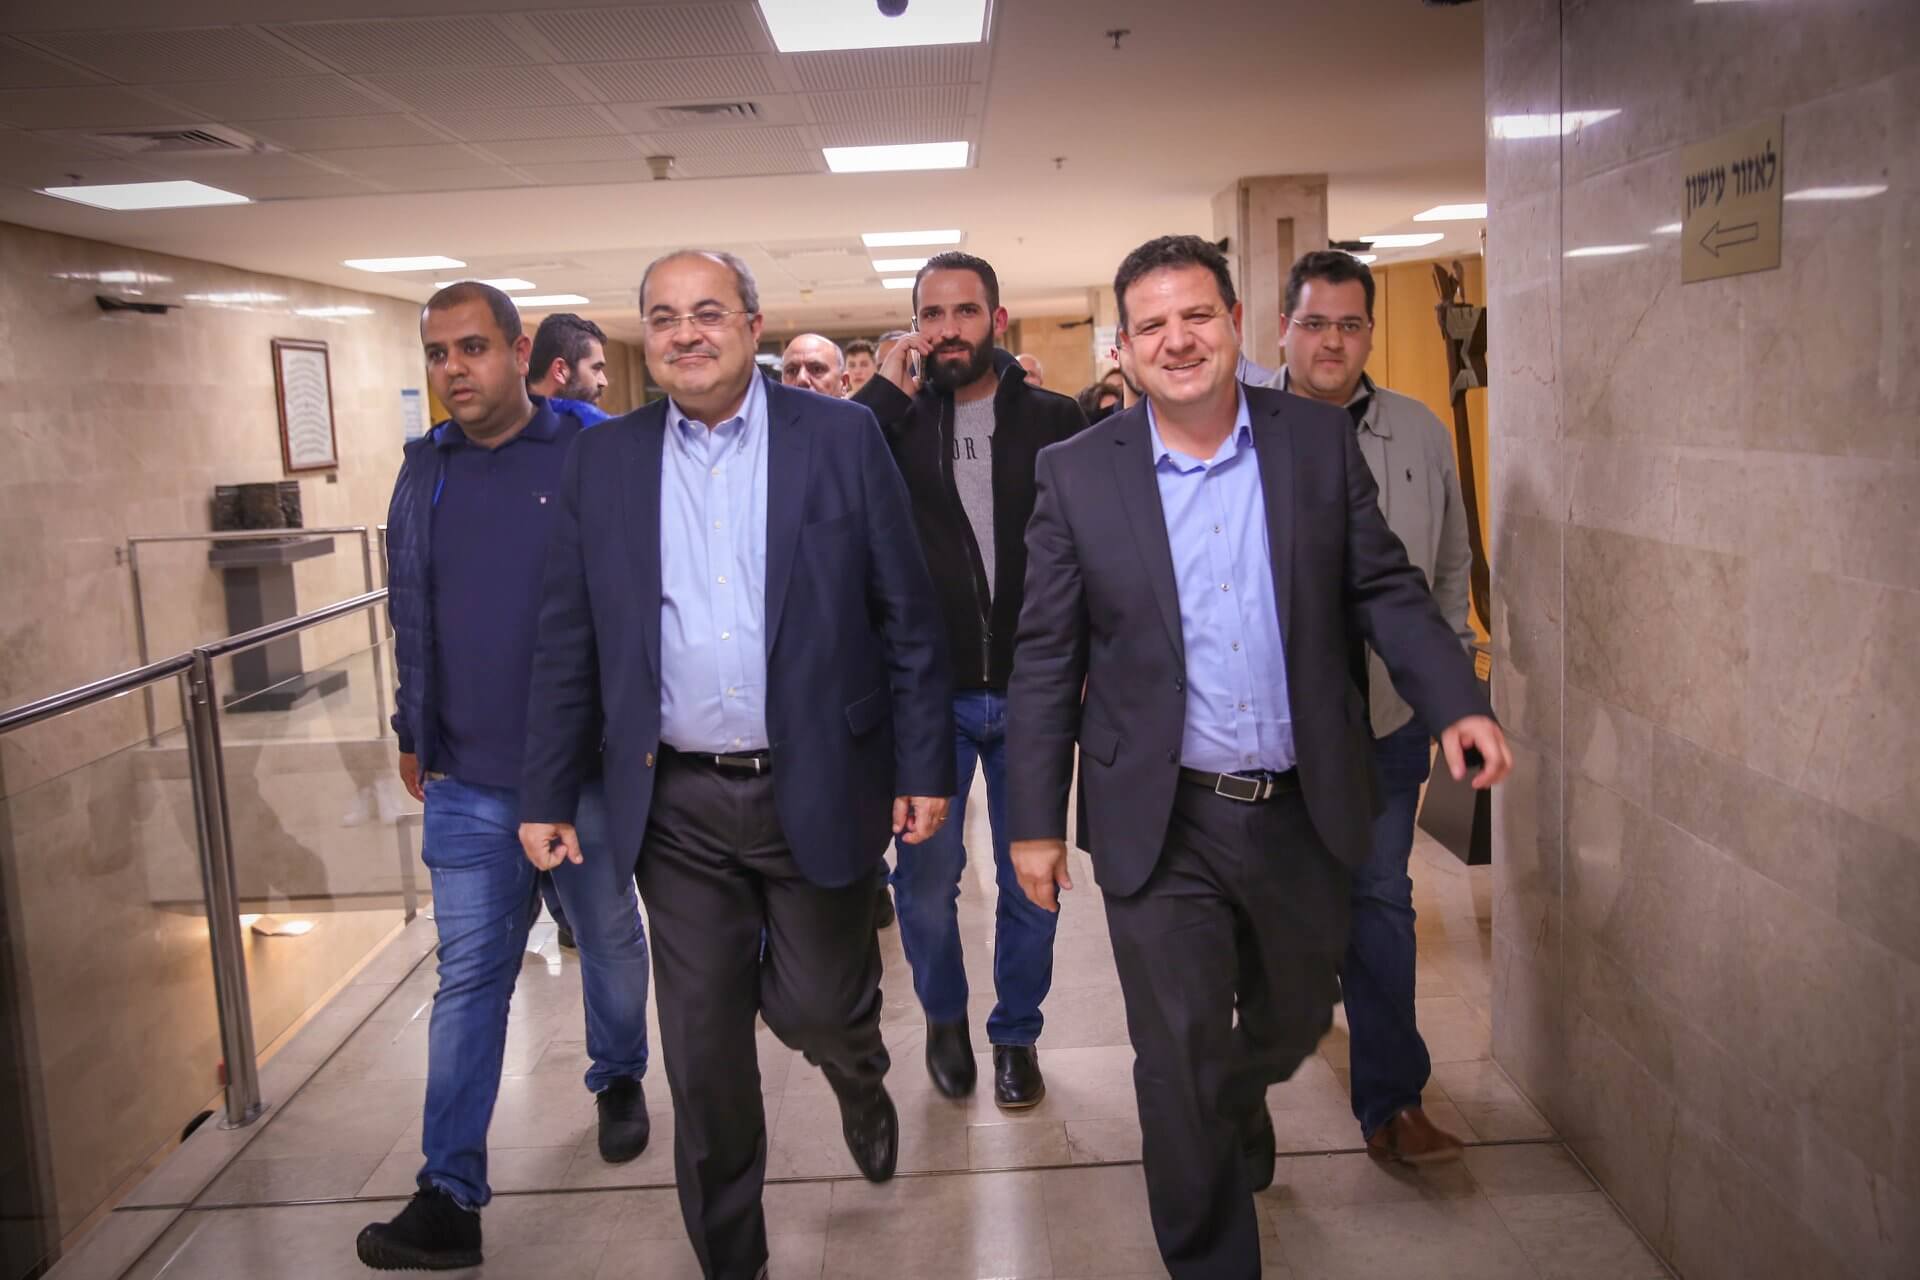 Head of the Joint List, Ayman Odeh (R), walks through the halls of Knesset with Joint List Knesset member Ahmad Tibi. The Joint List is a coalition of four Arab factions, Odeh leads the Hadash faction and Tibi leads the Ta'al movement, July 24, 2019. (Photo: Ayman Odeh/Facebook)